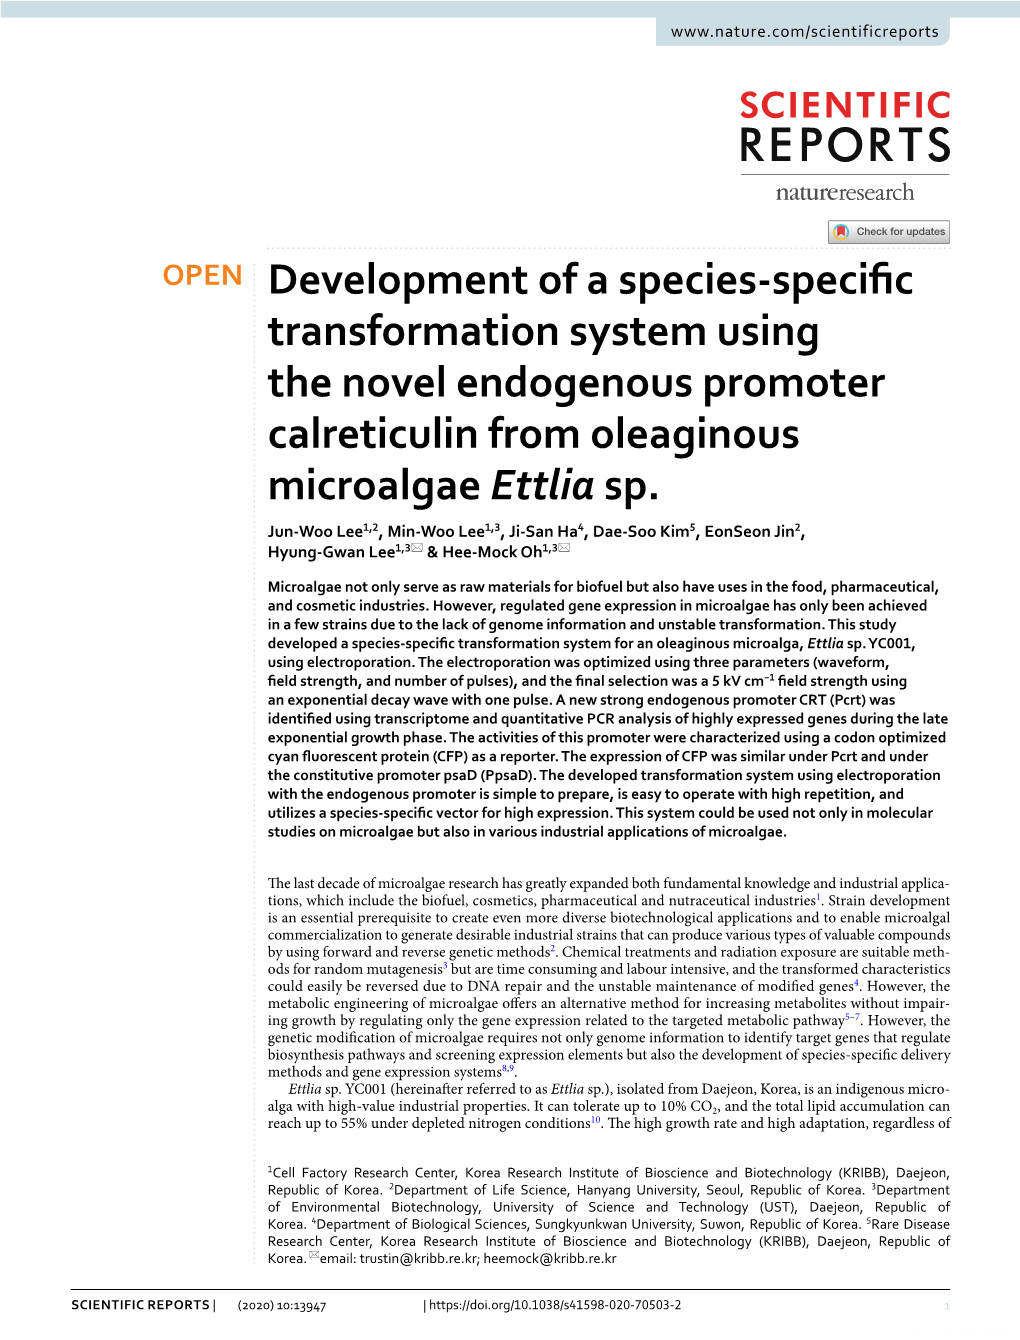 Development of a Species-Specific Transformation System Using The